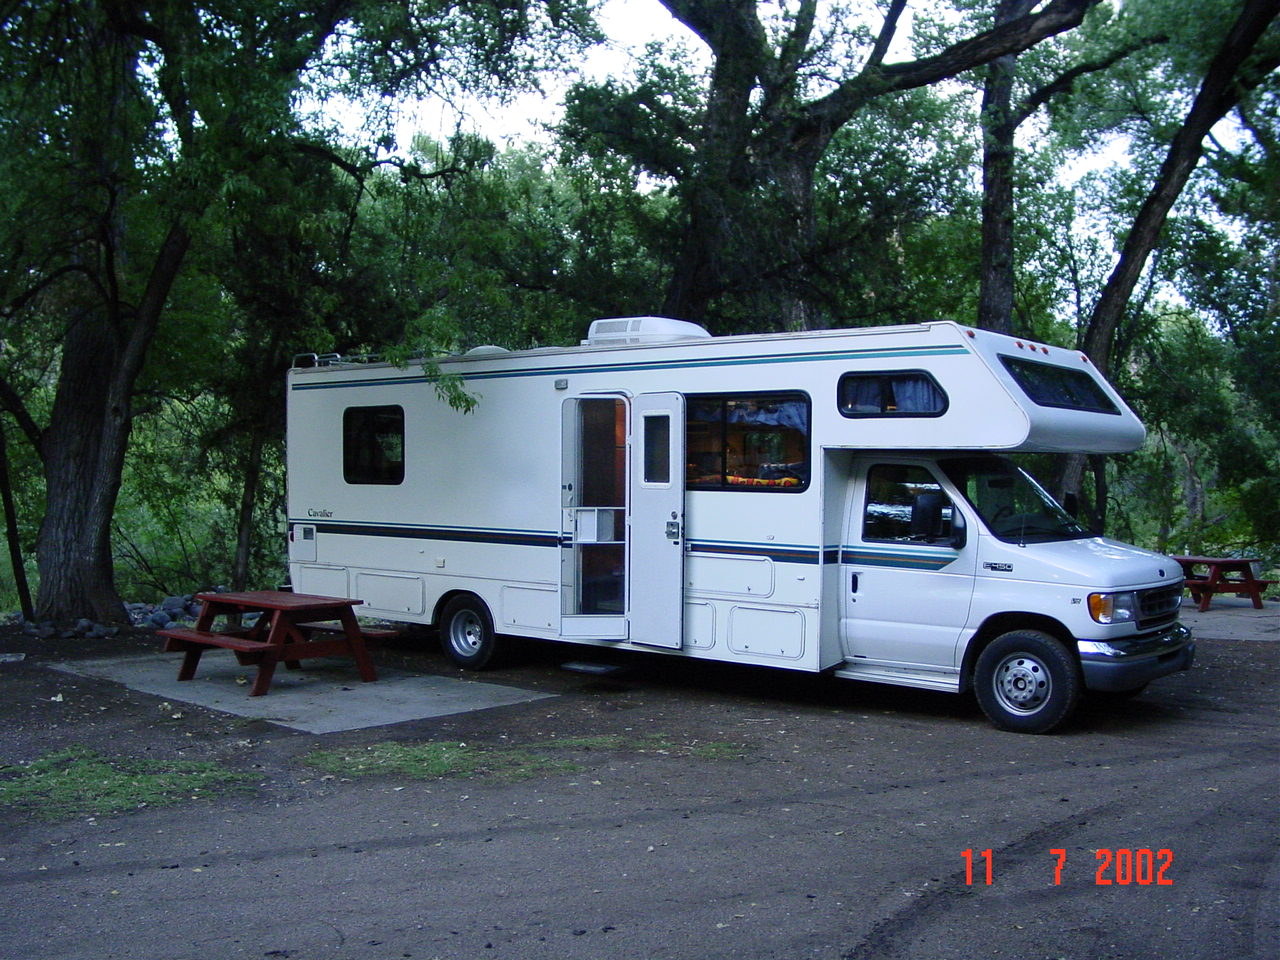 Picture of our road trip vehicle of choice: our RV